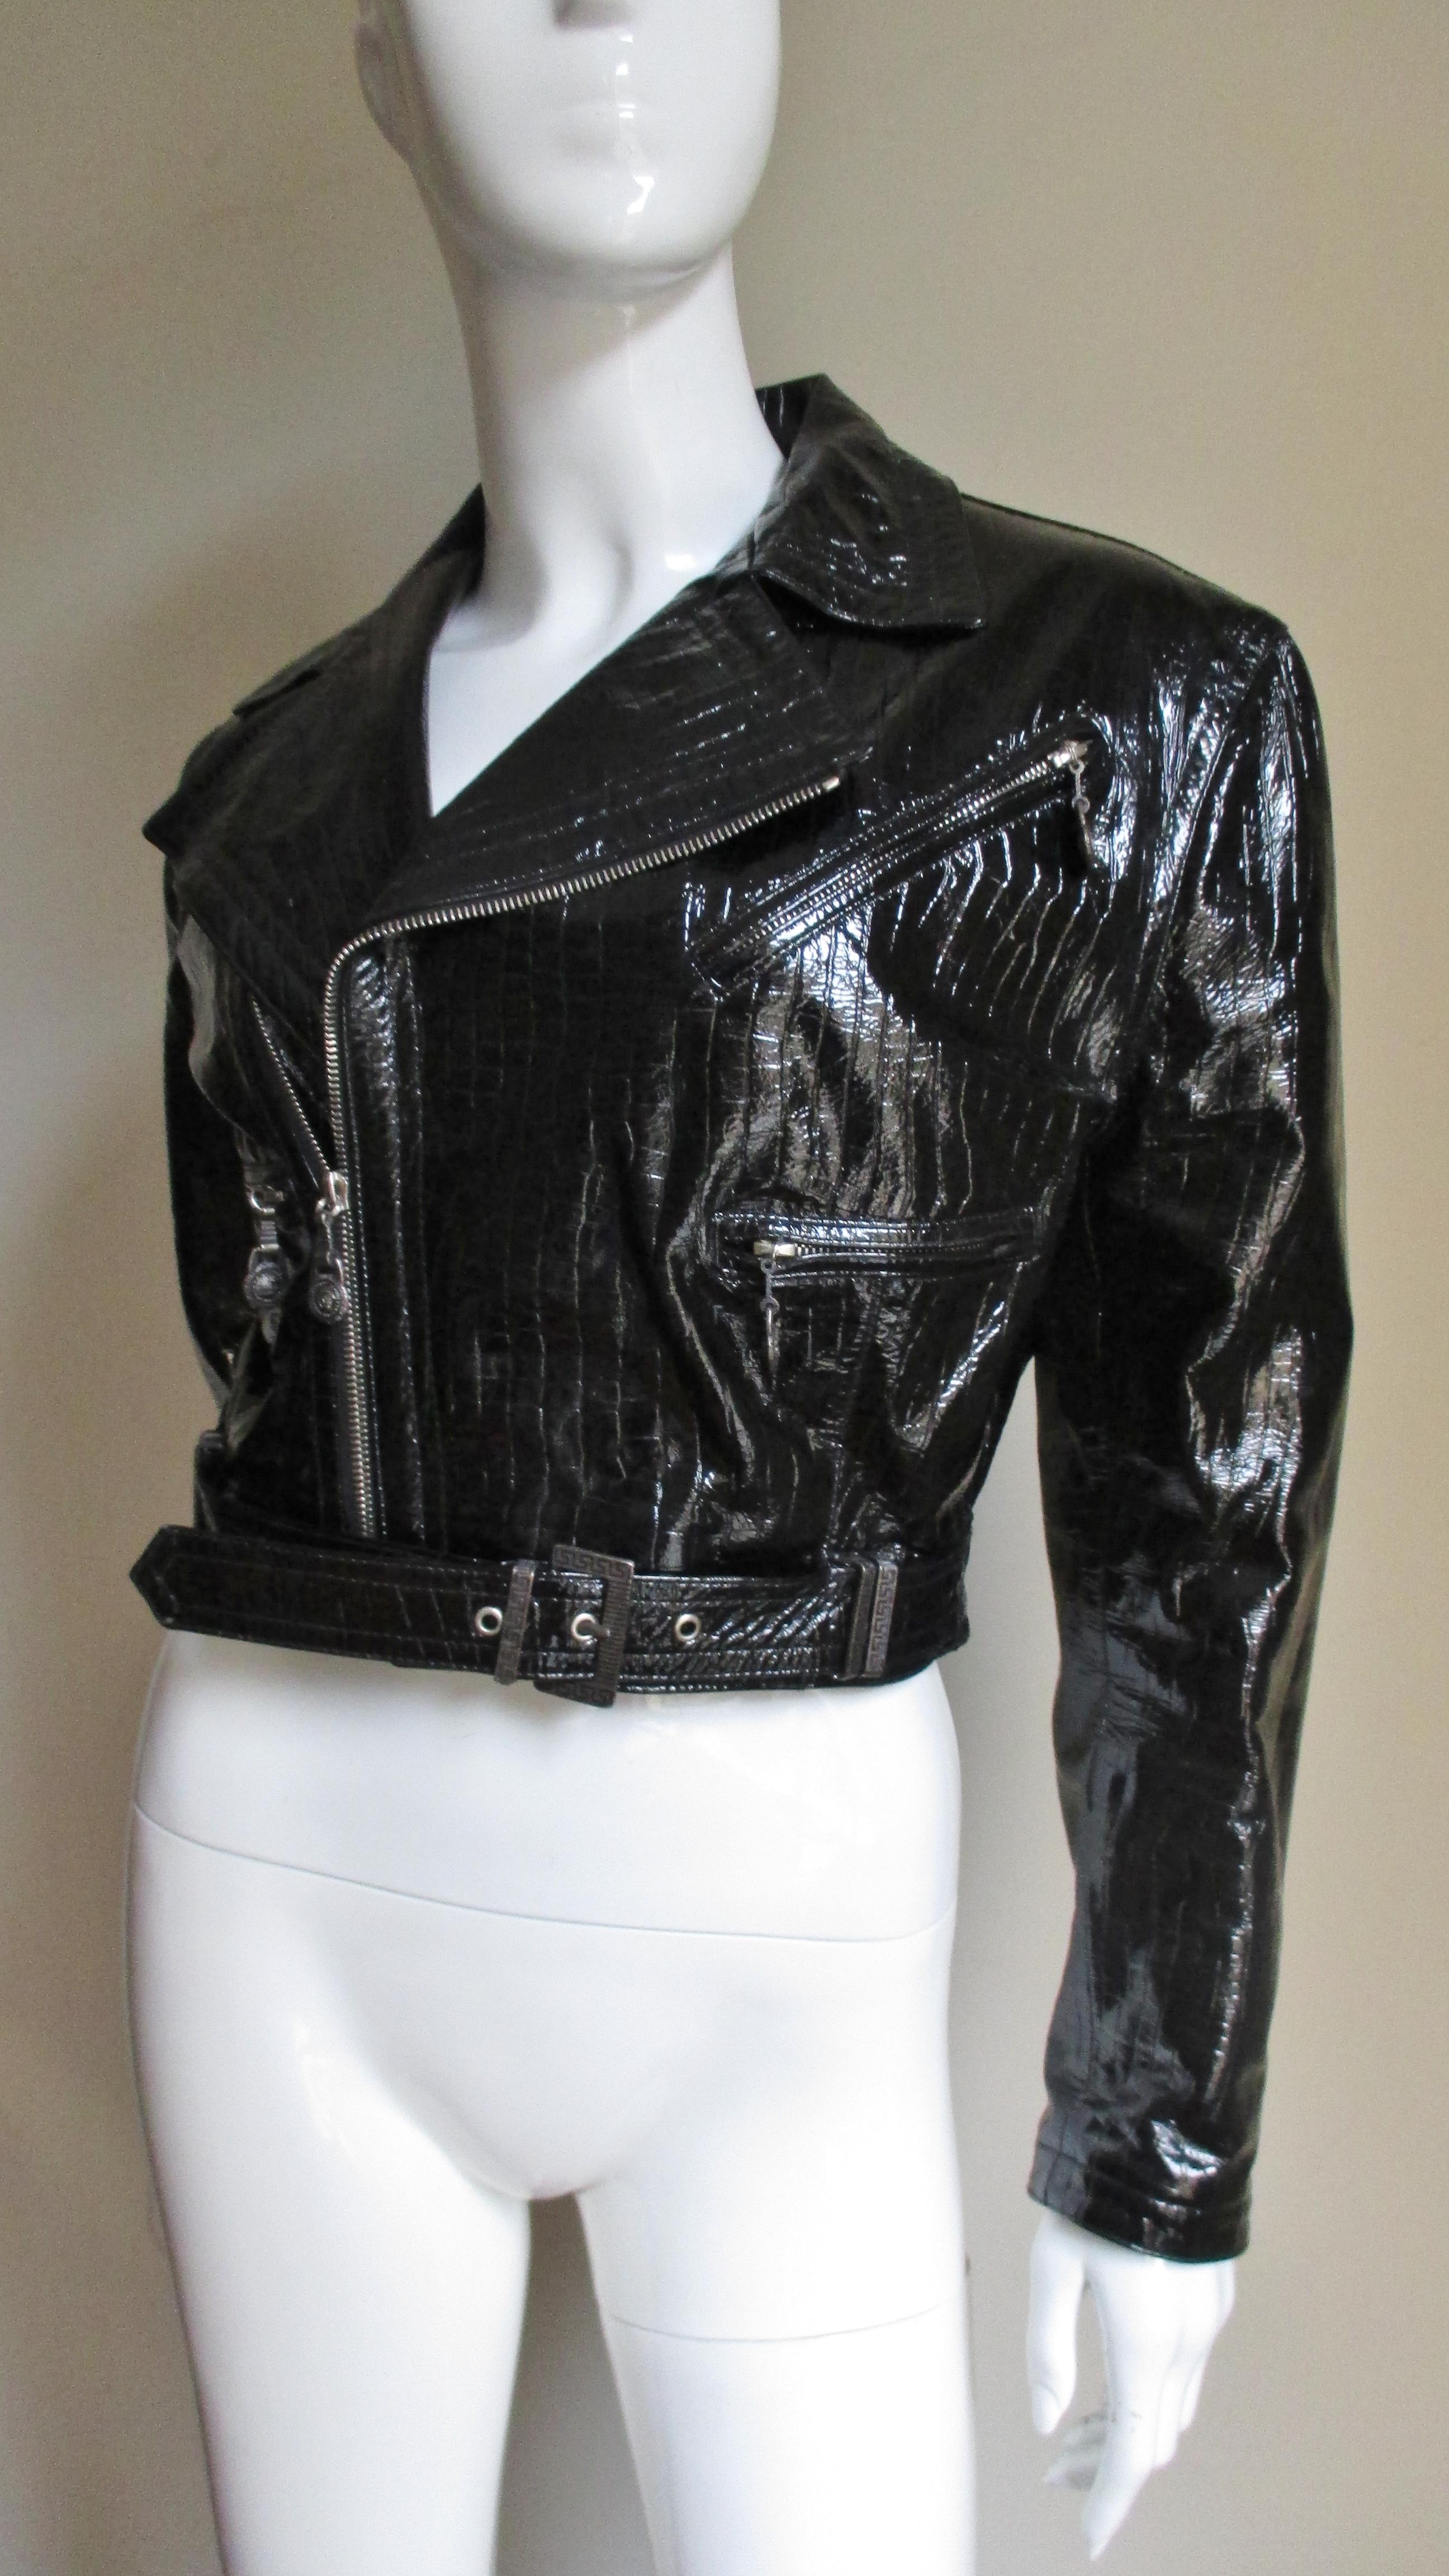 Women's 1990s Gianni Versace Patent Leather Motorcycle Jacket and Skirt